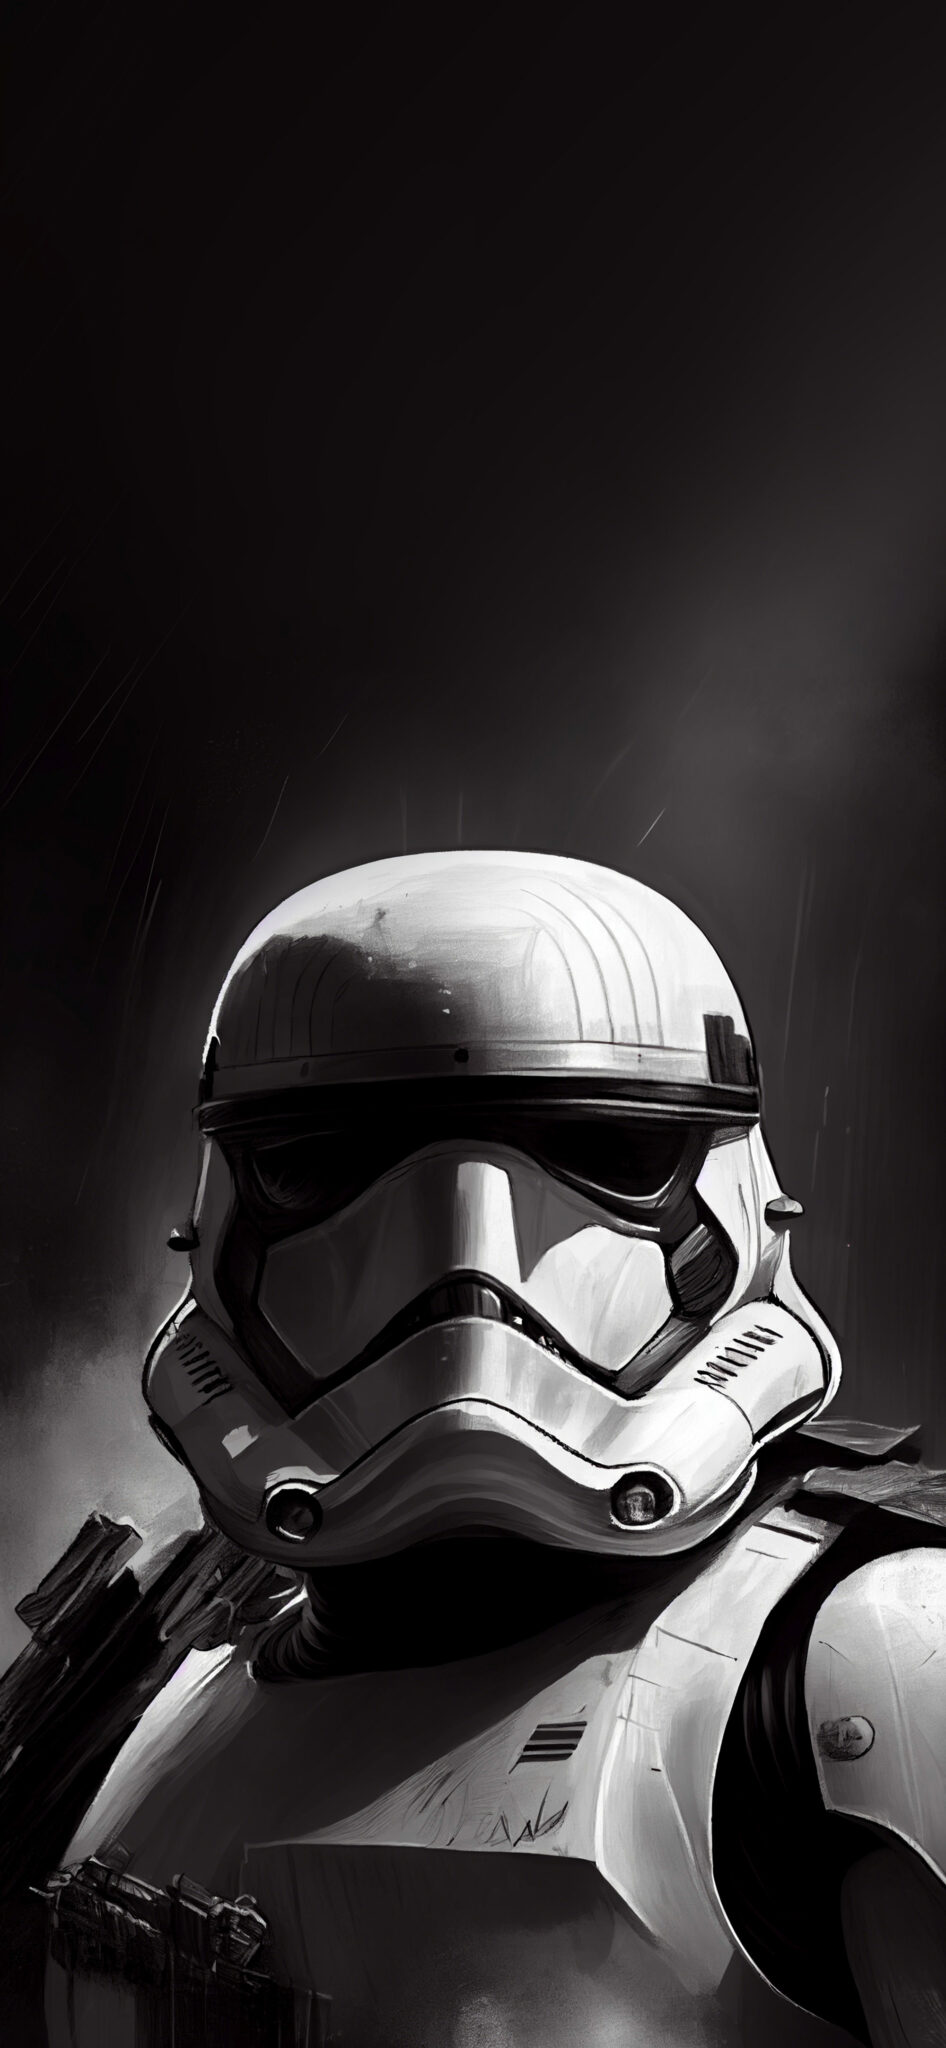 Star Wars Stormtrooper Black and White Wallpapers - W-Clan